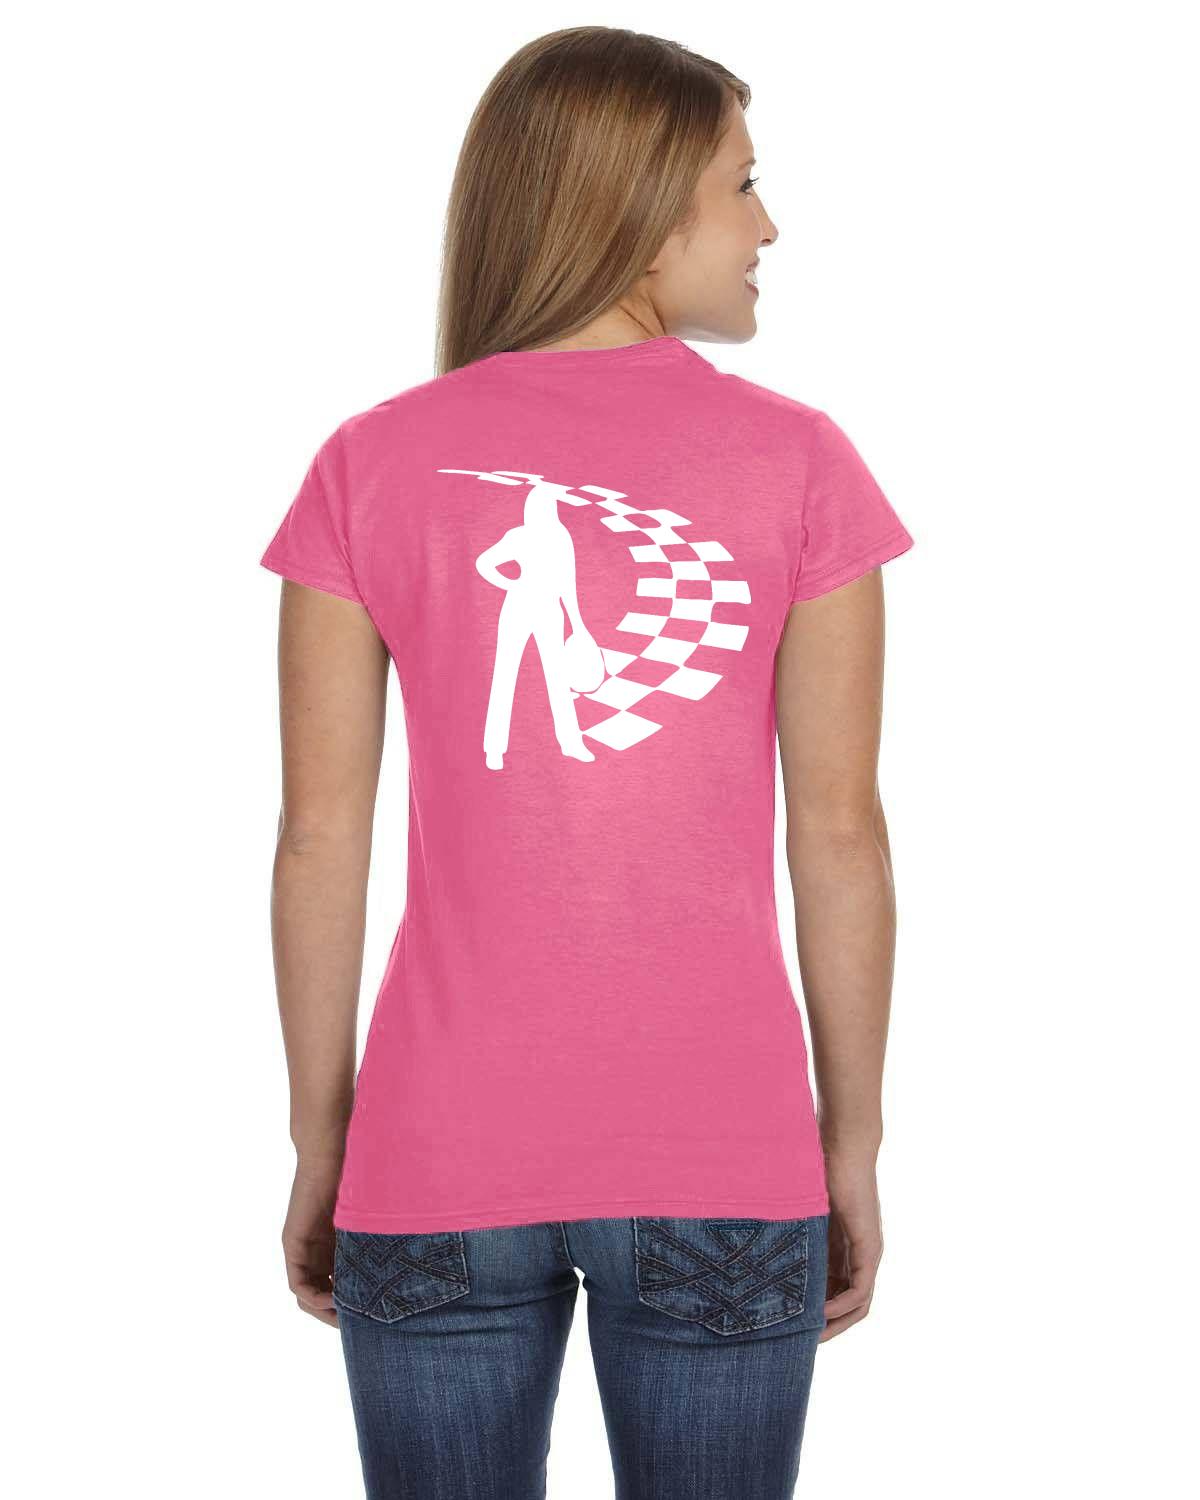 LOTO Ladies of the Oval Ladies' T-Shirt